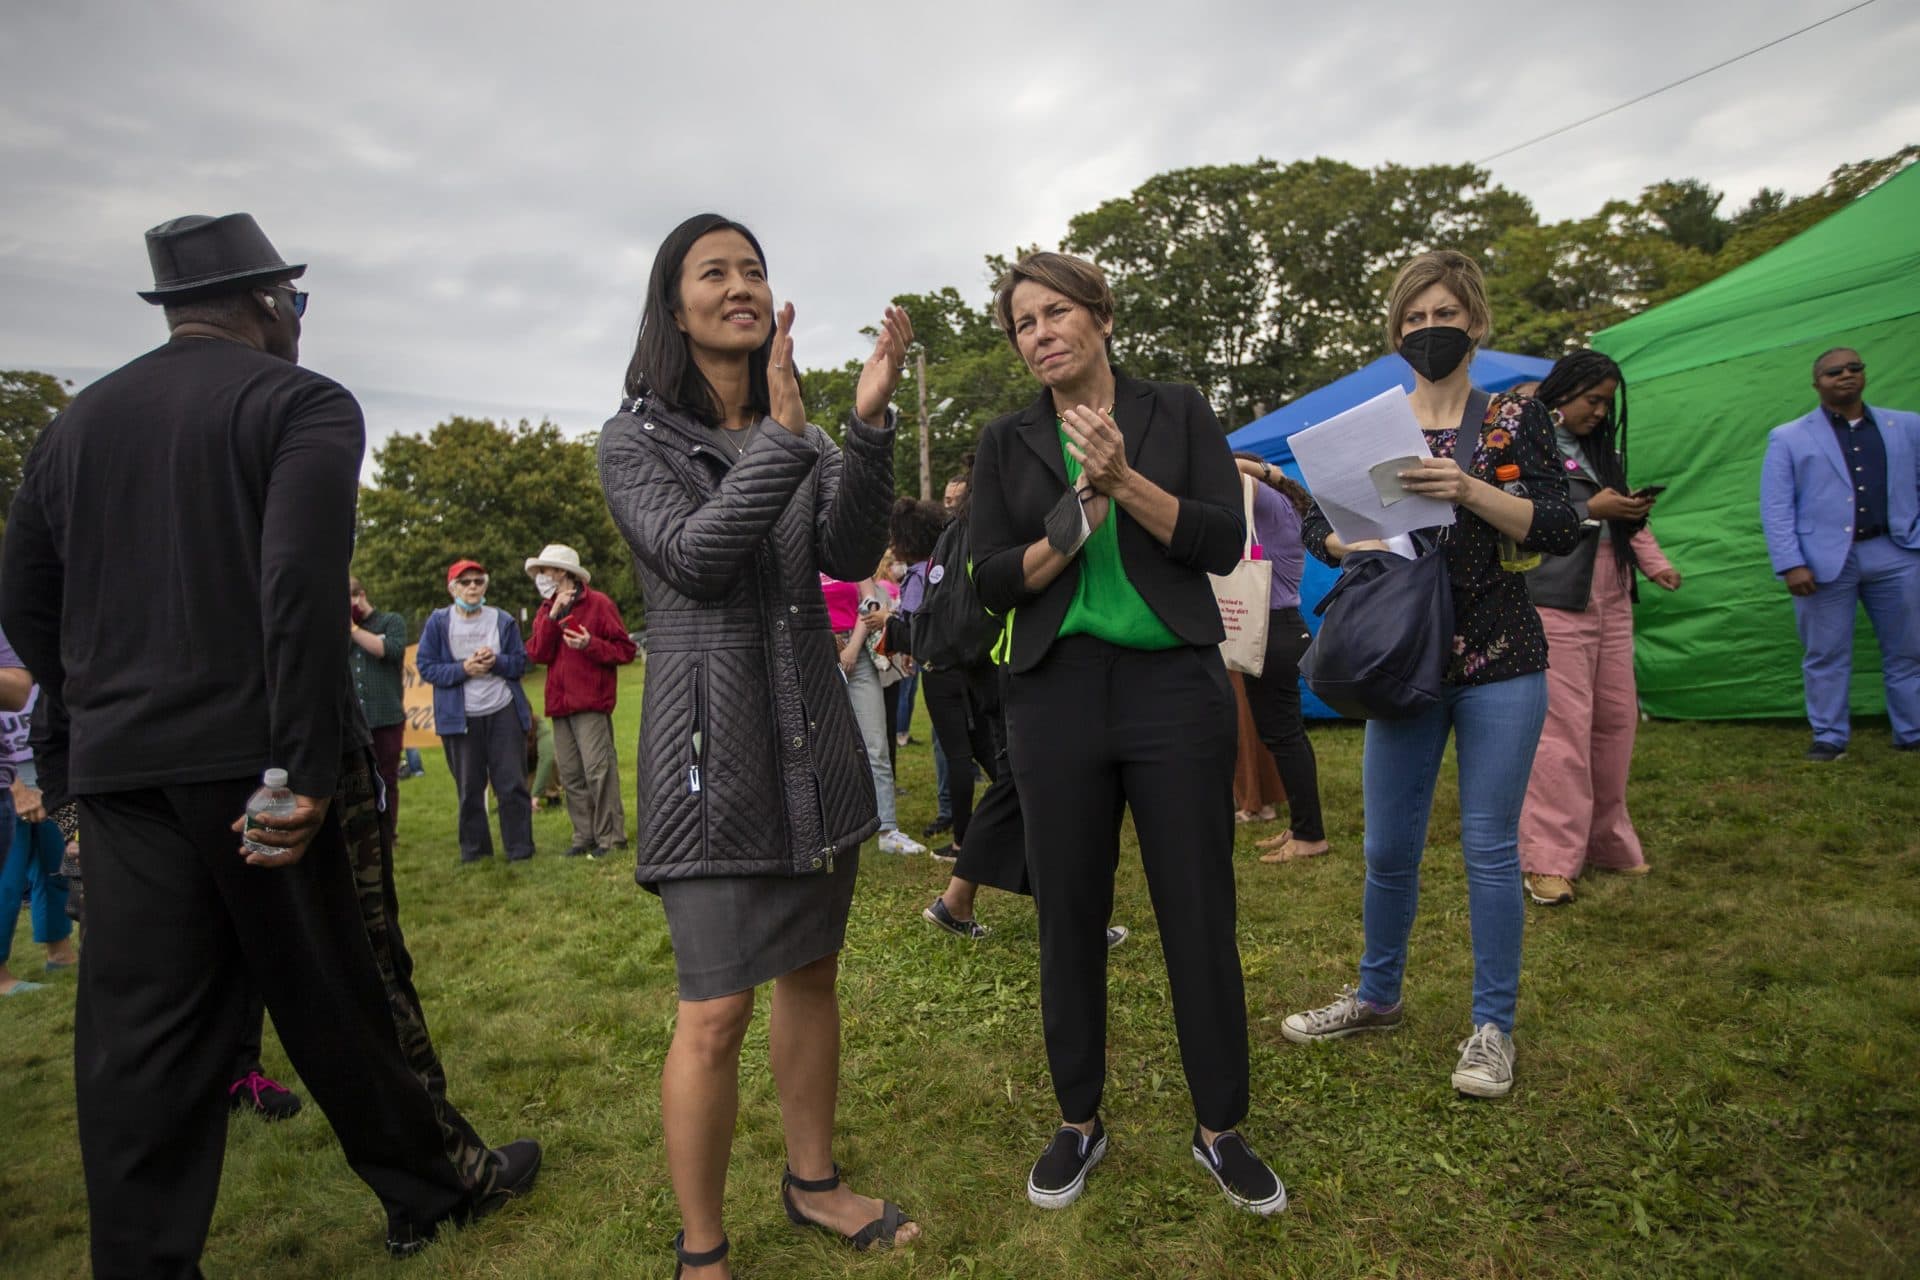 Boston mayoral candidate Michelle Wu and Attorney General Maura Healey applaud during a speech. (Jesse Costa/WBUR)